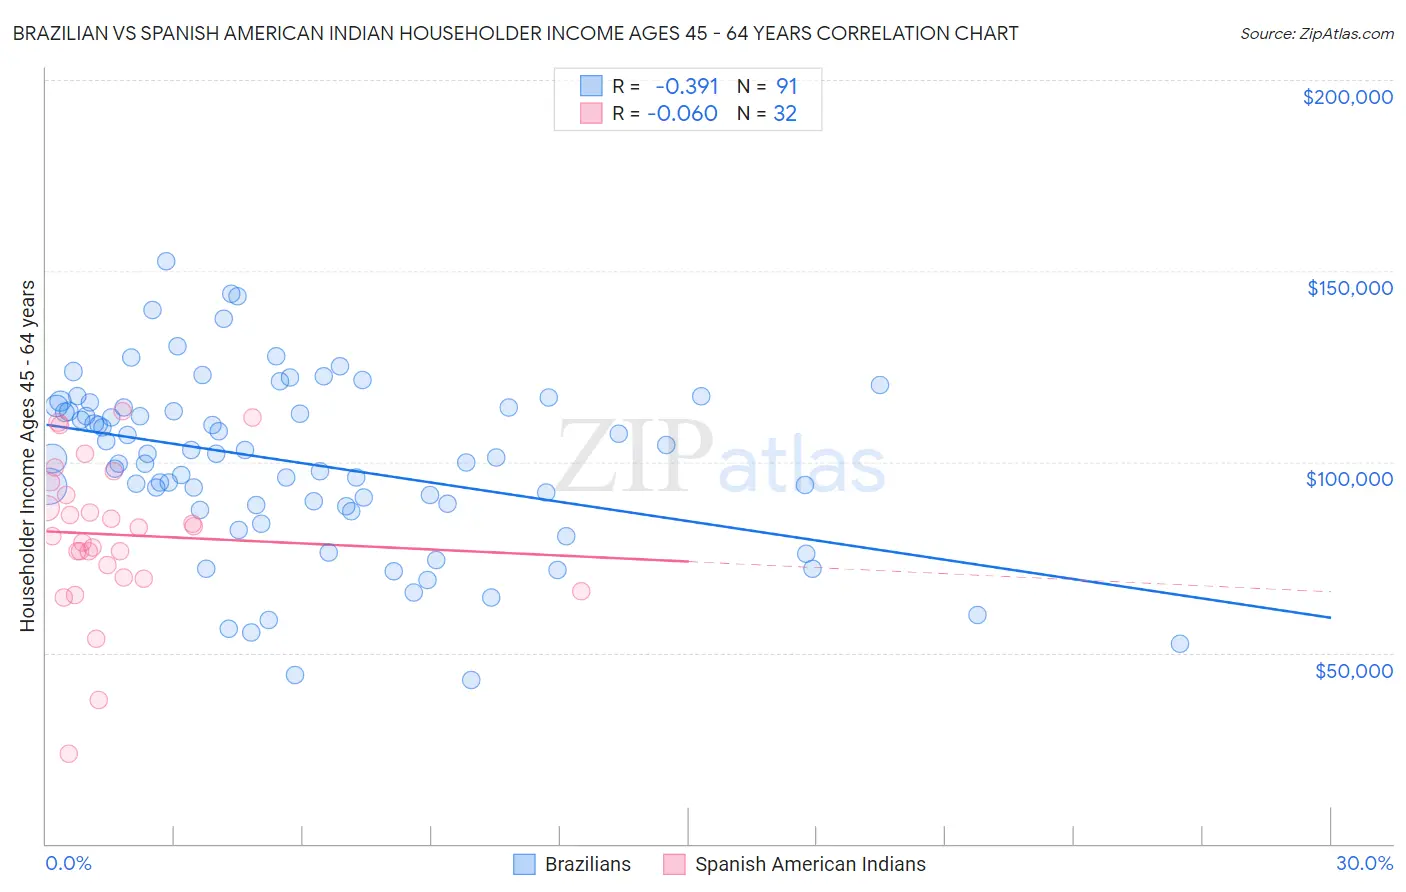 Brazilian vs Spanish American Indian Householder Income Ages 45 - 64 years